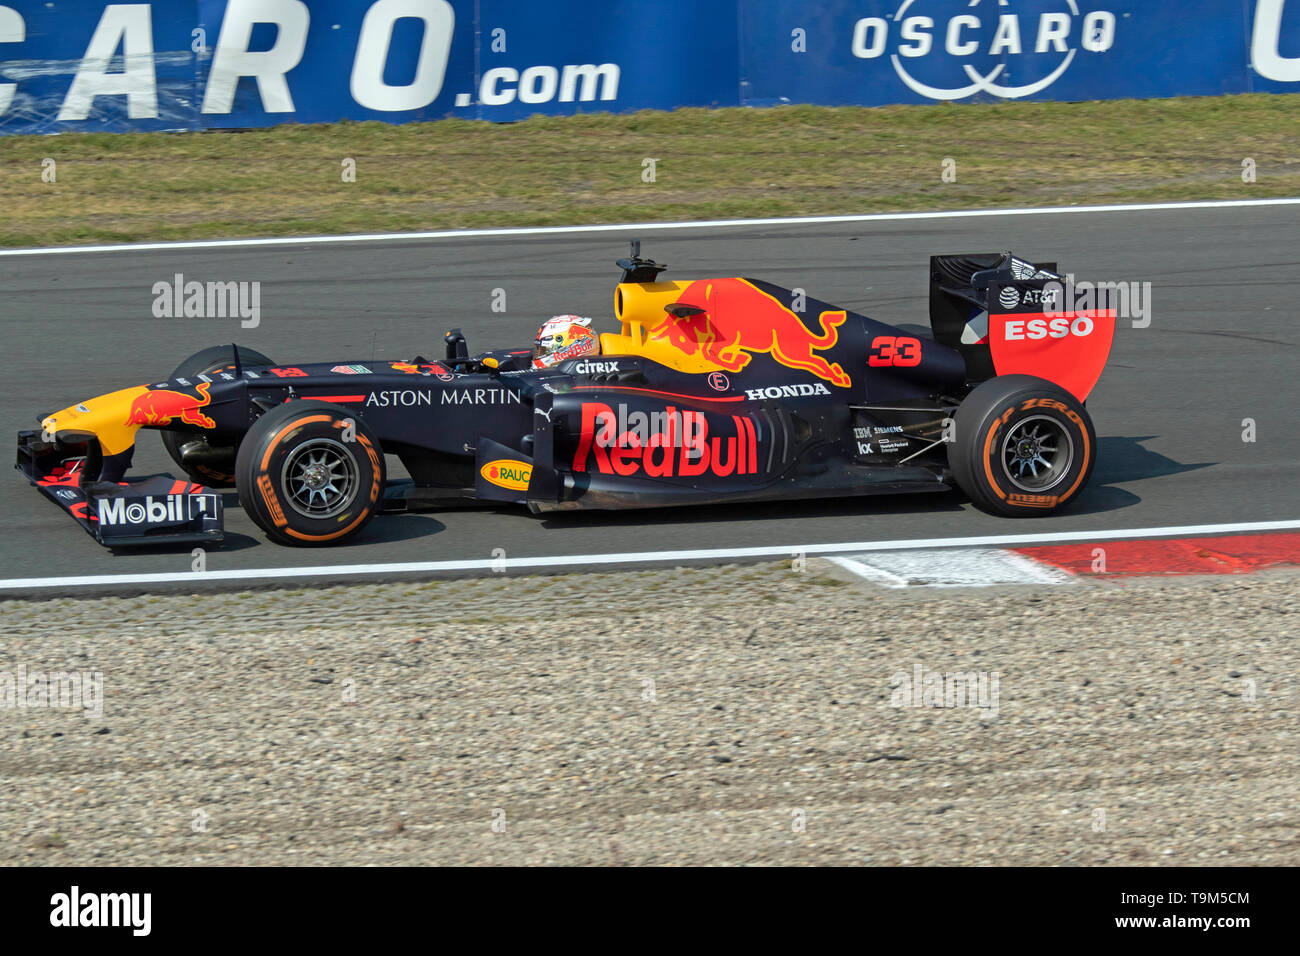 De Emigreren Positief Max Verstappen formule 1 coureur in his formula 1 car with red and white  curb stones Stock Photo - Alamy